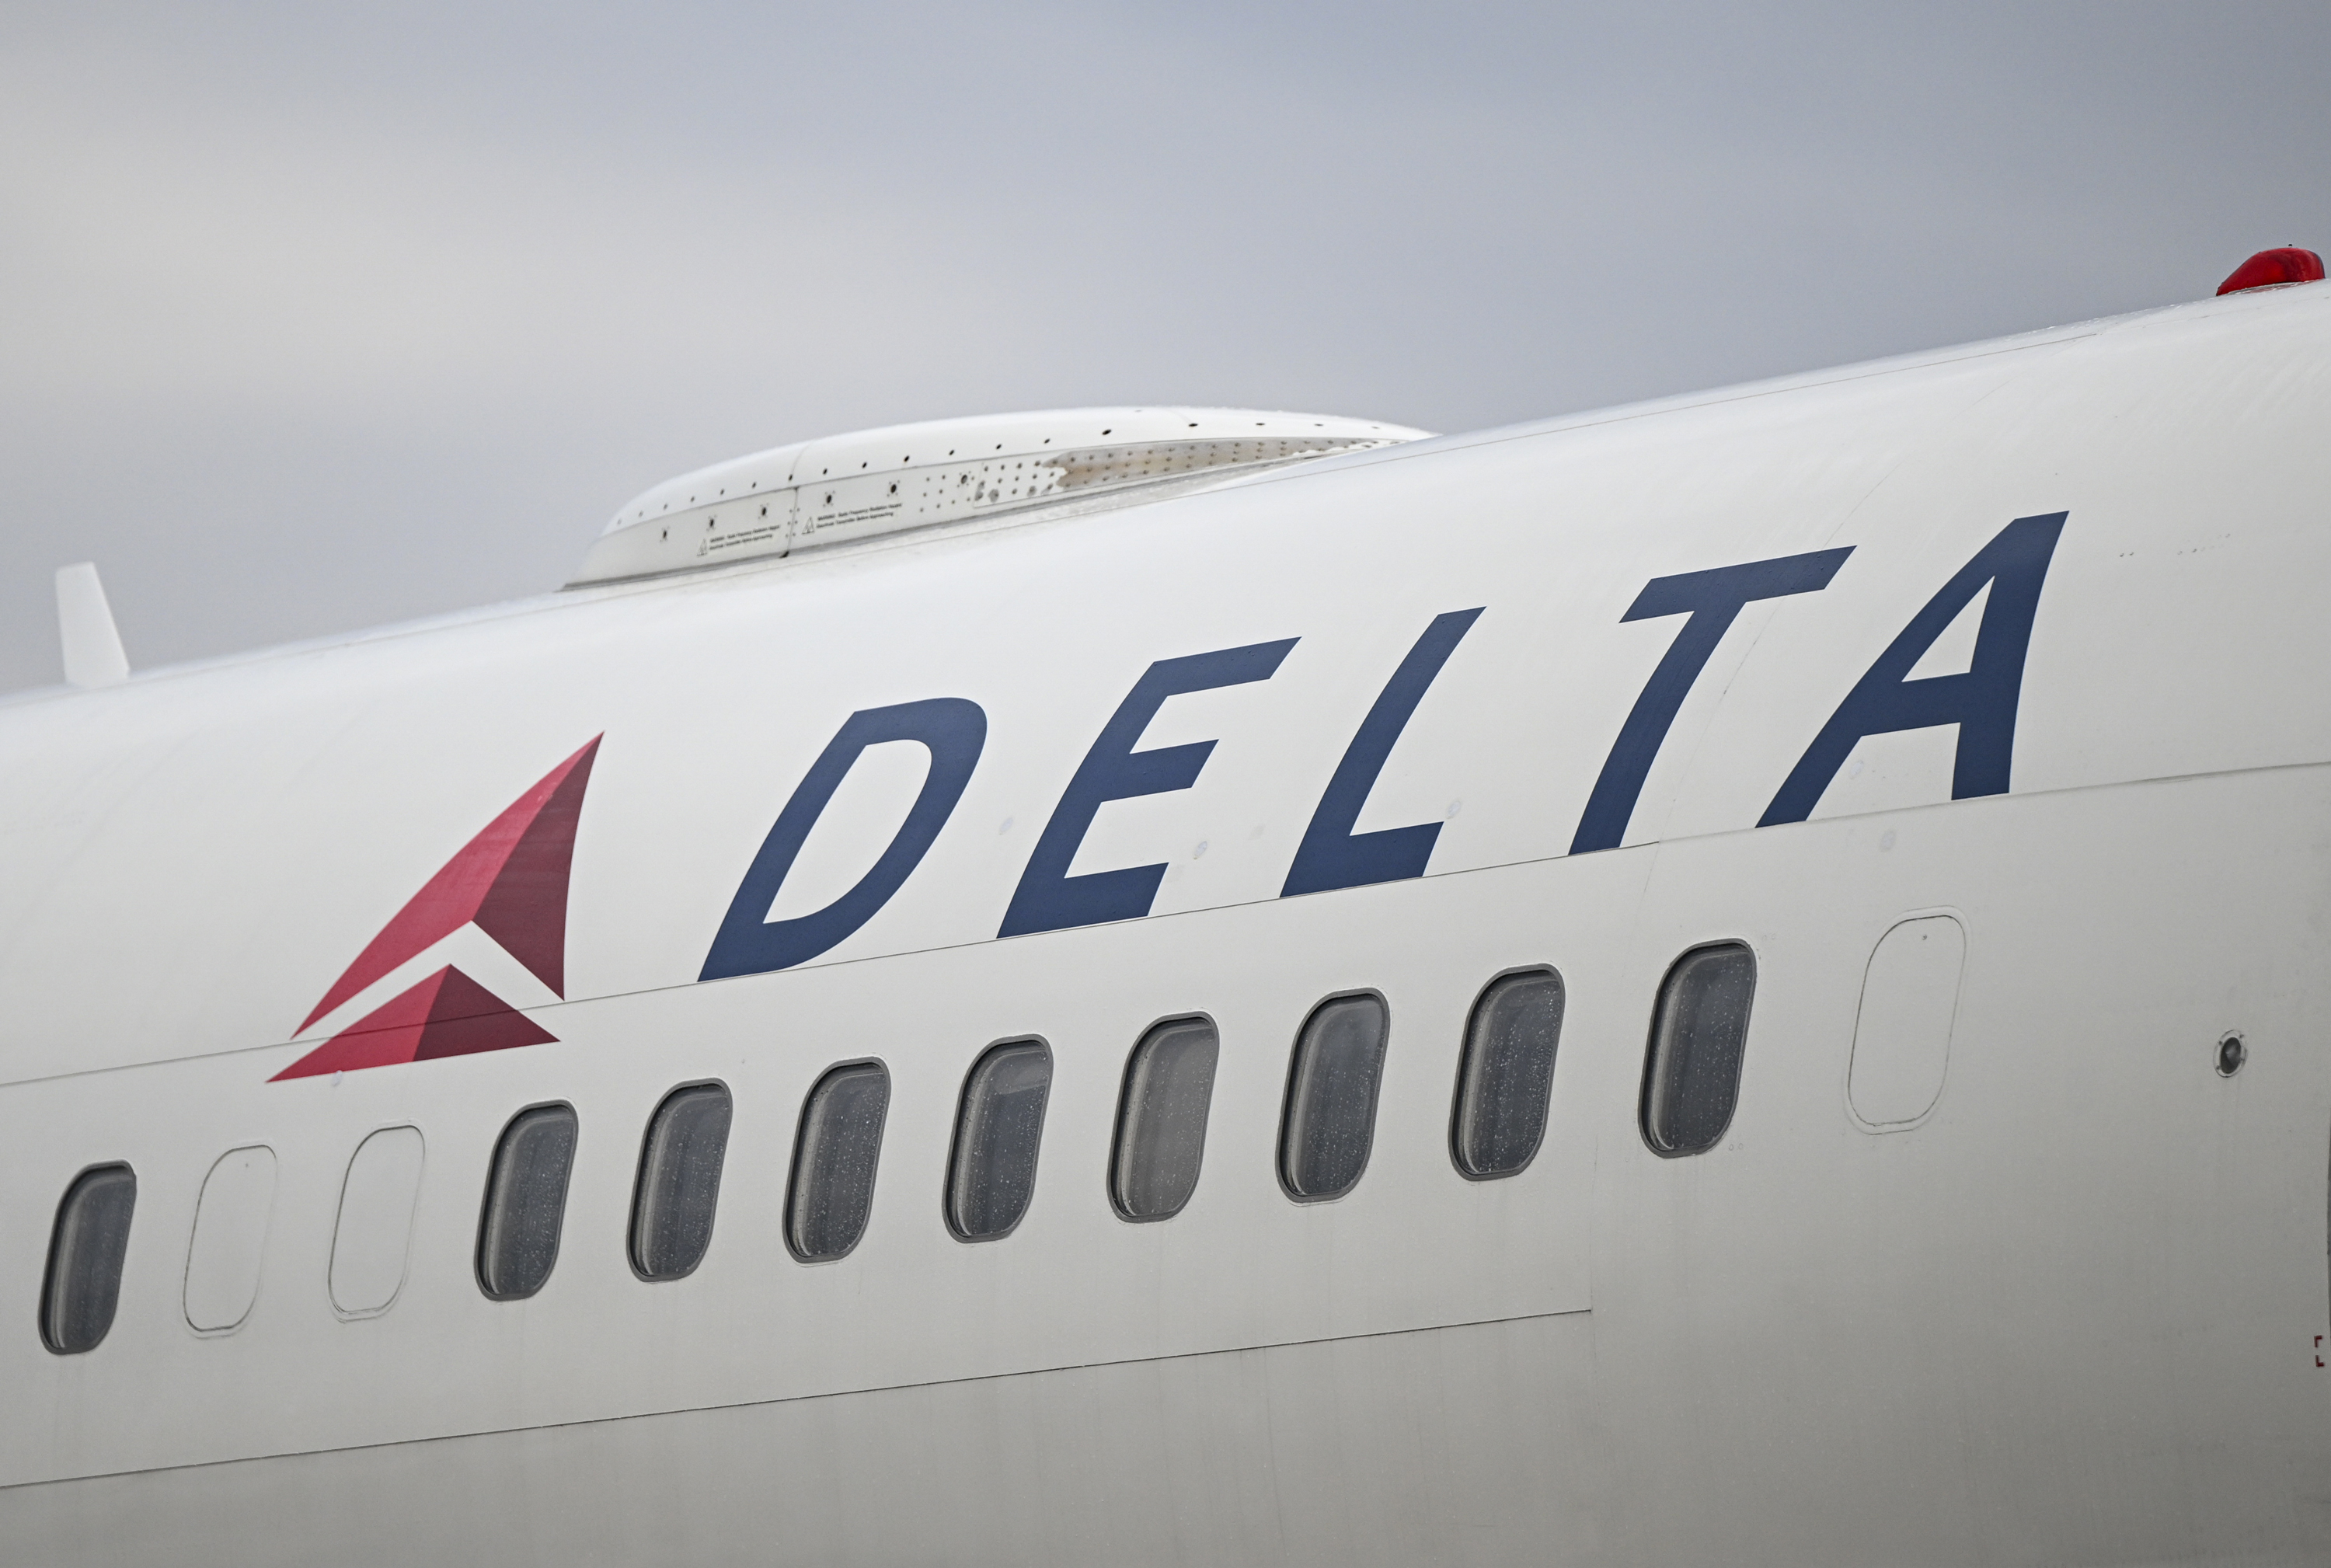 A Delta Airlines logo is seen on a passenger plane, in Washington DC, on February 16.